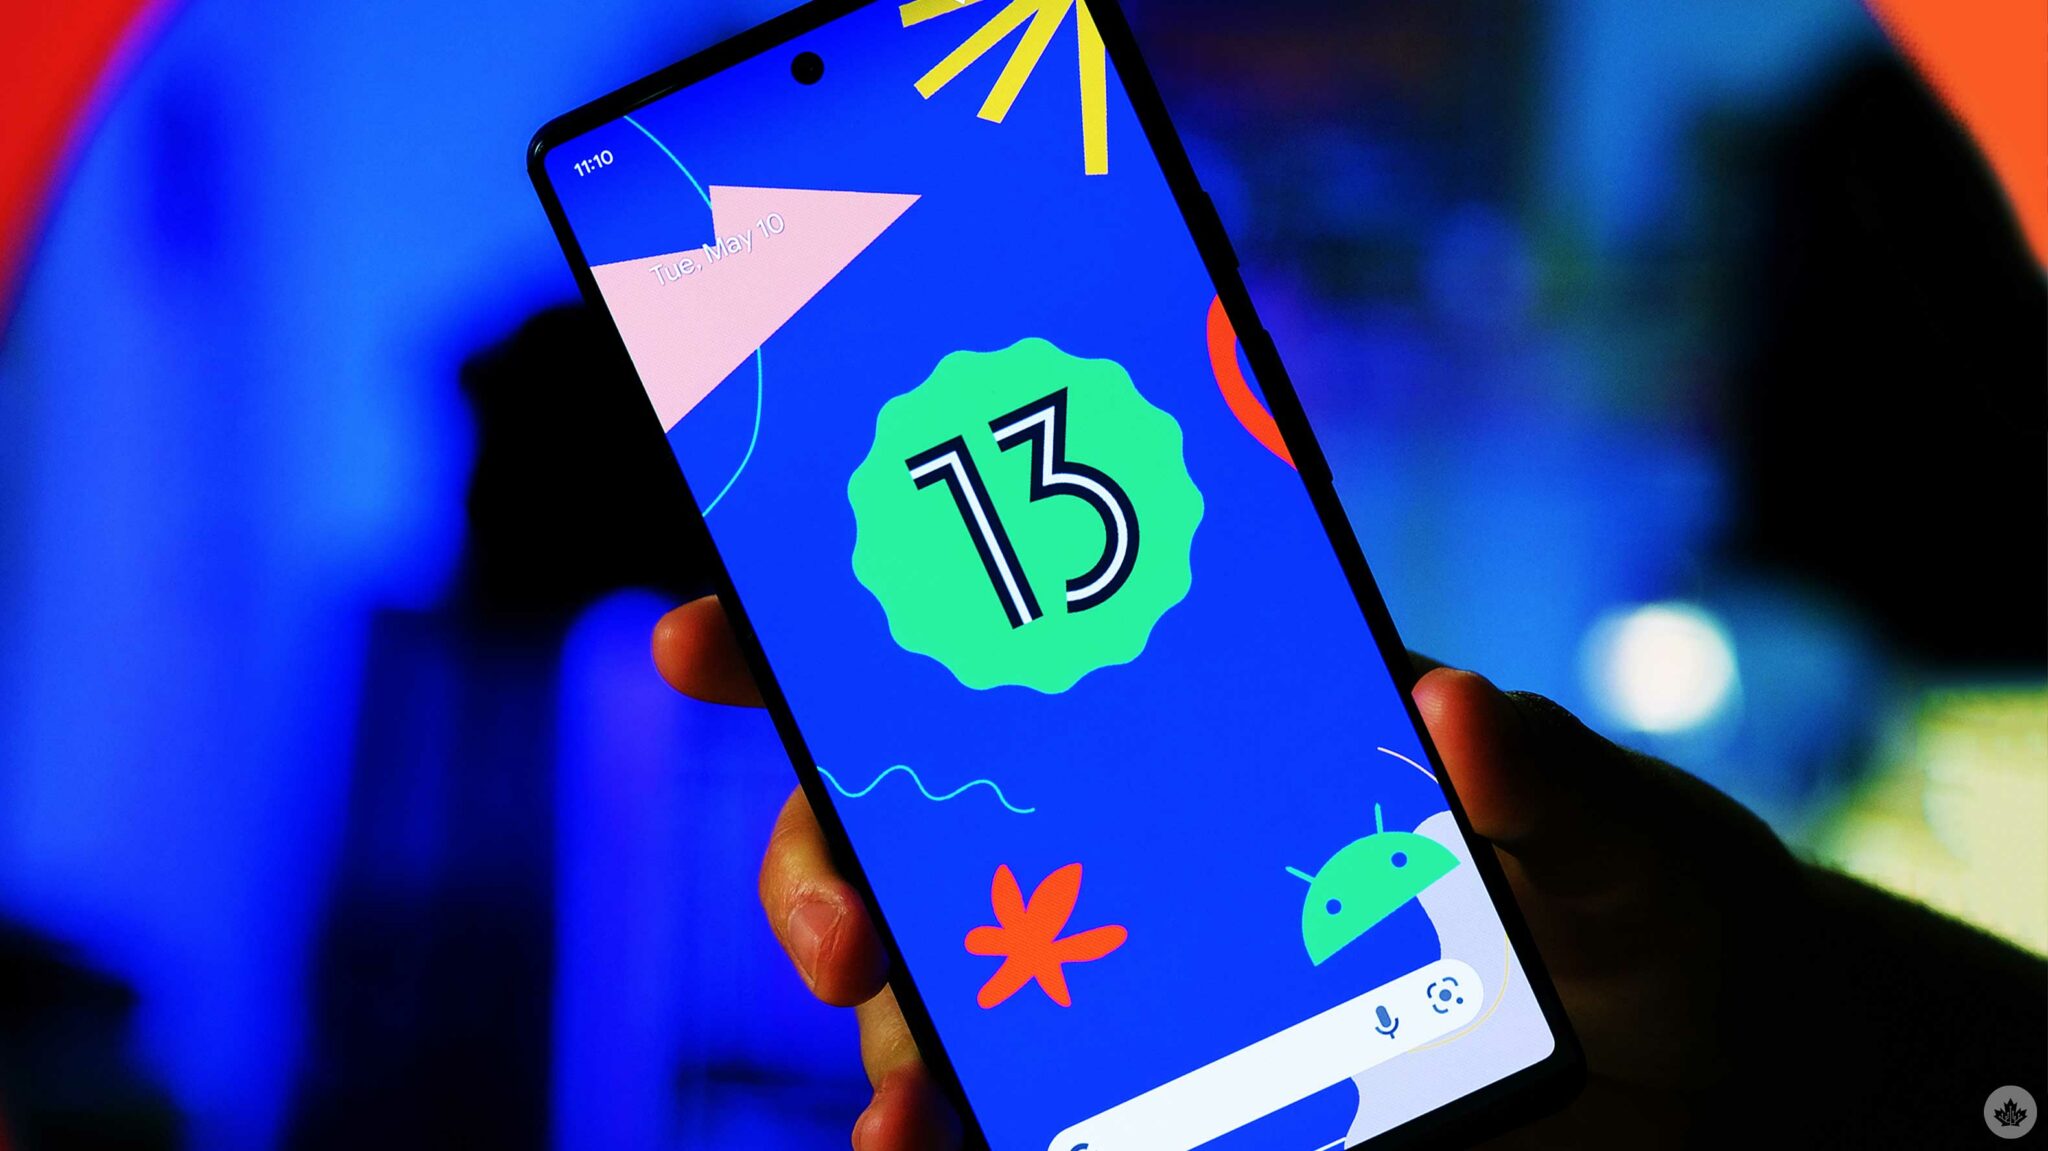 Android 13 Beta 3 is now available for Pixel phones